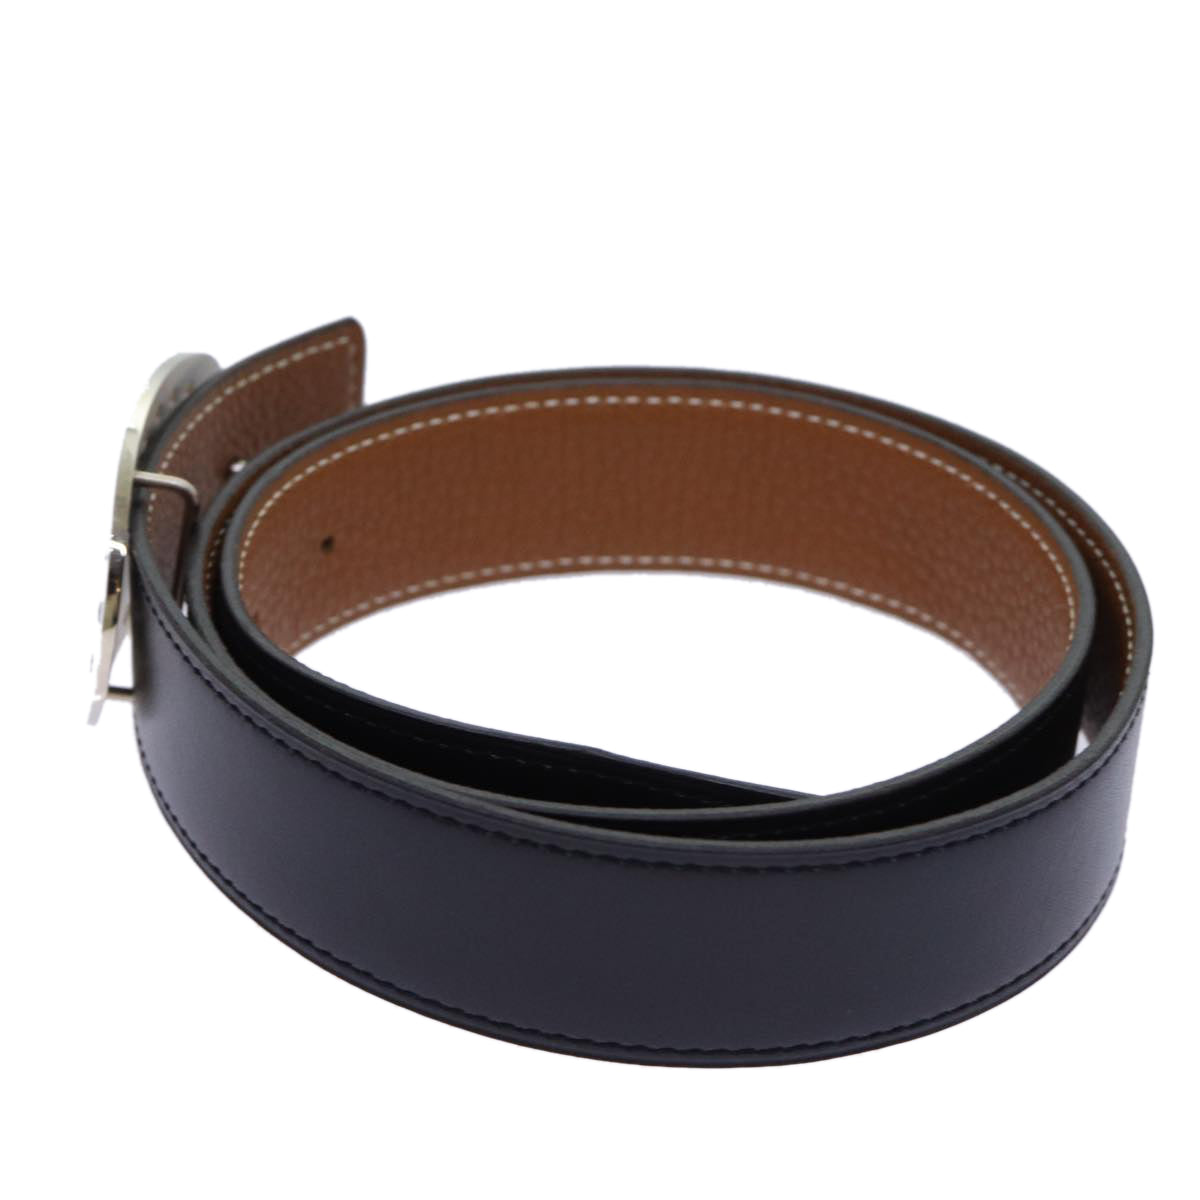 HERMES Evelyn oval buckle reversible Belt Leather Black Brown Auth am5971